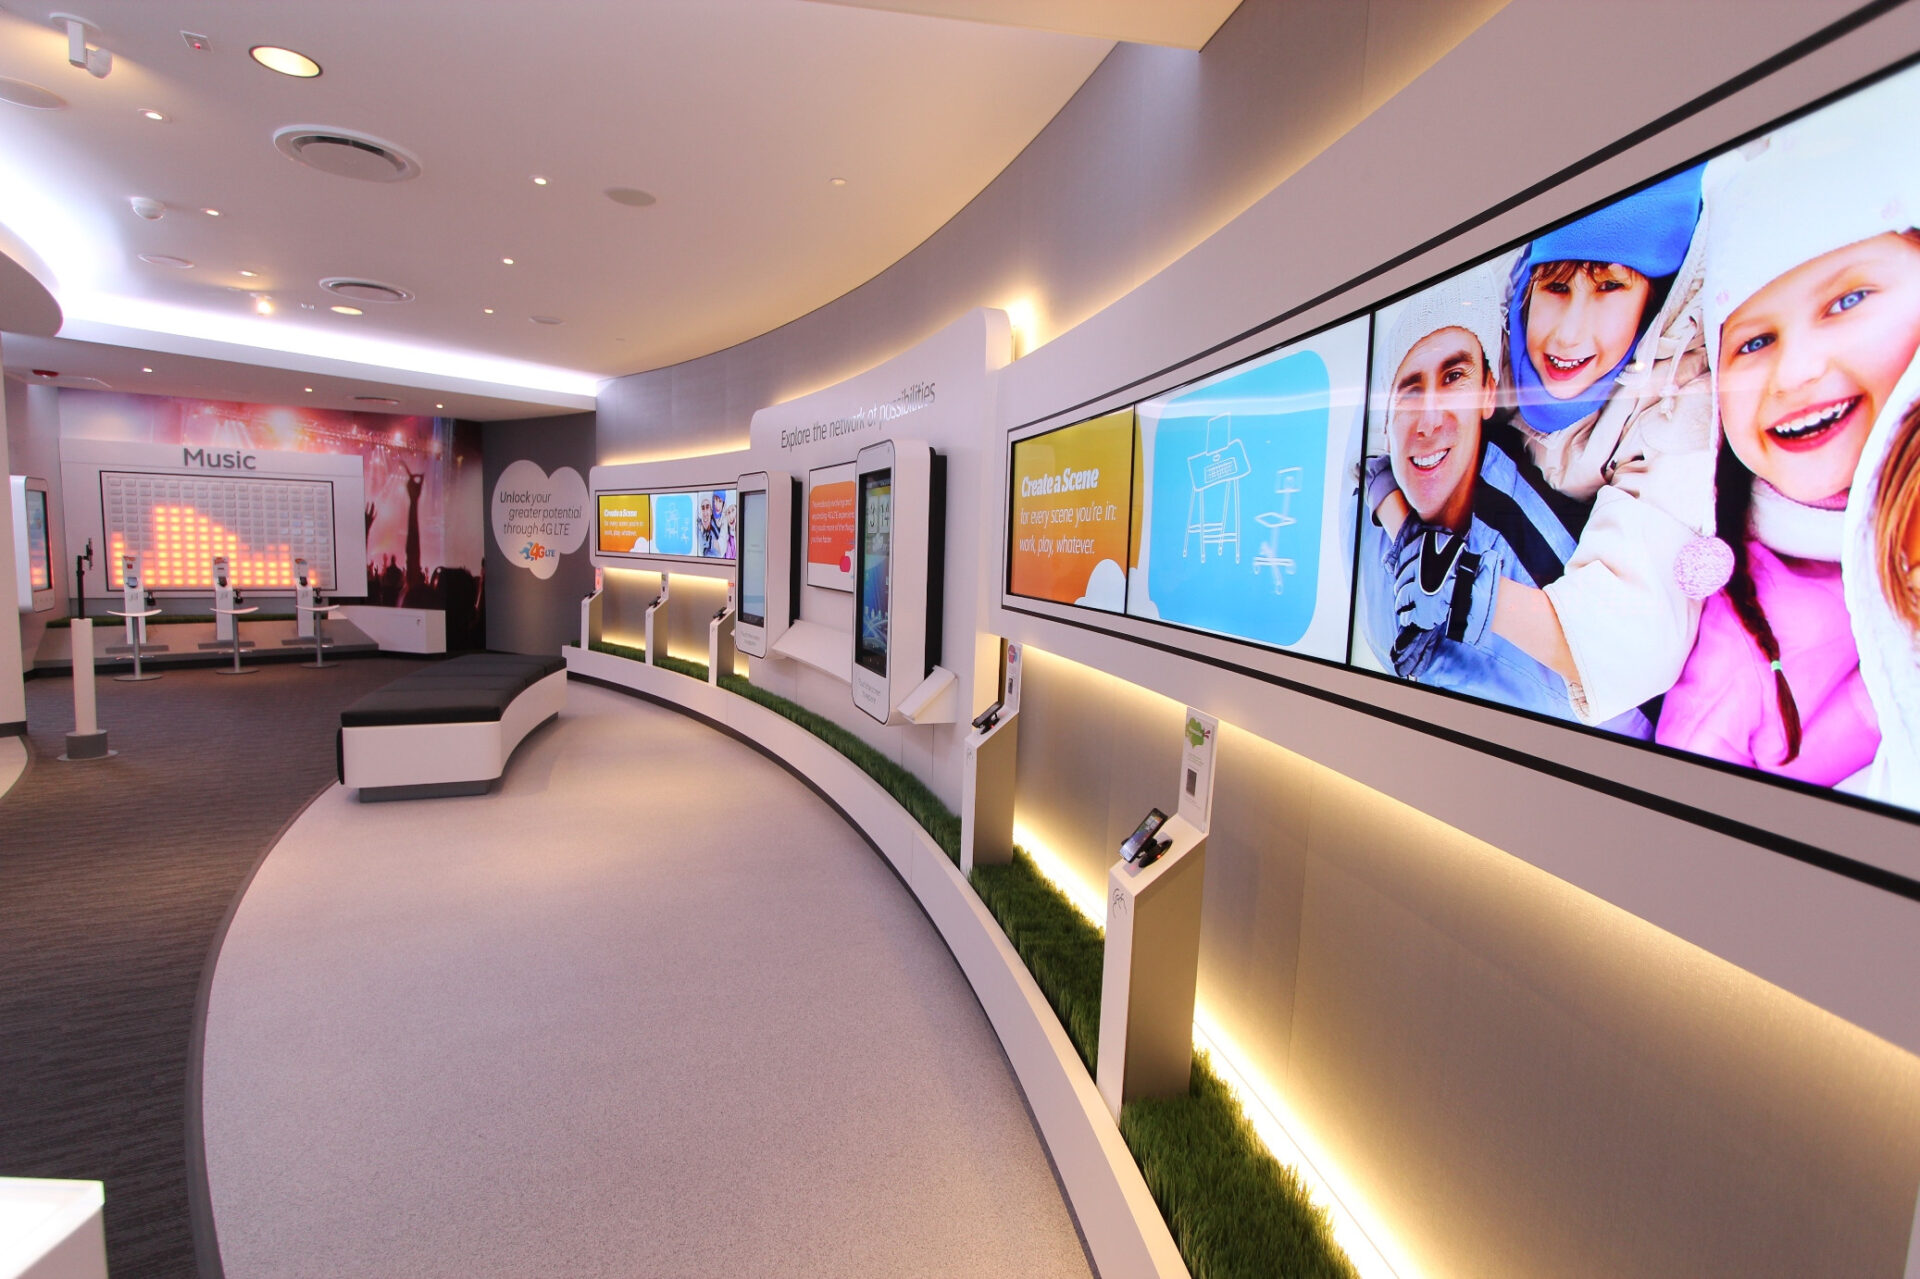 India Digital Signage System Market Is Estimated To Witness High Growth Owing To Technological Advancements & Increasing Adoption of Digital Signage in Retail Sector